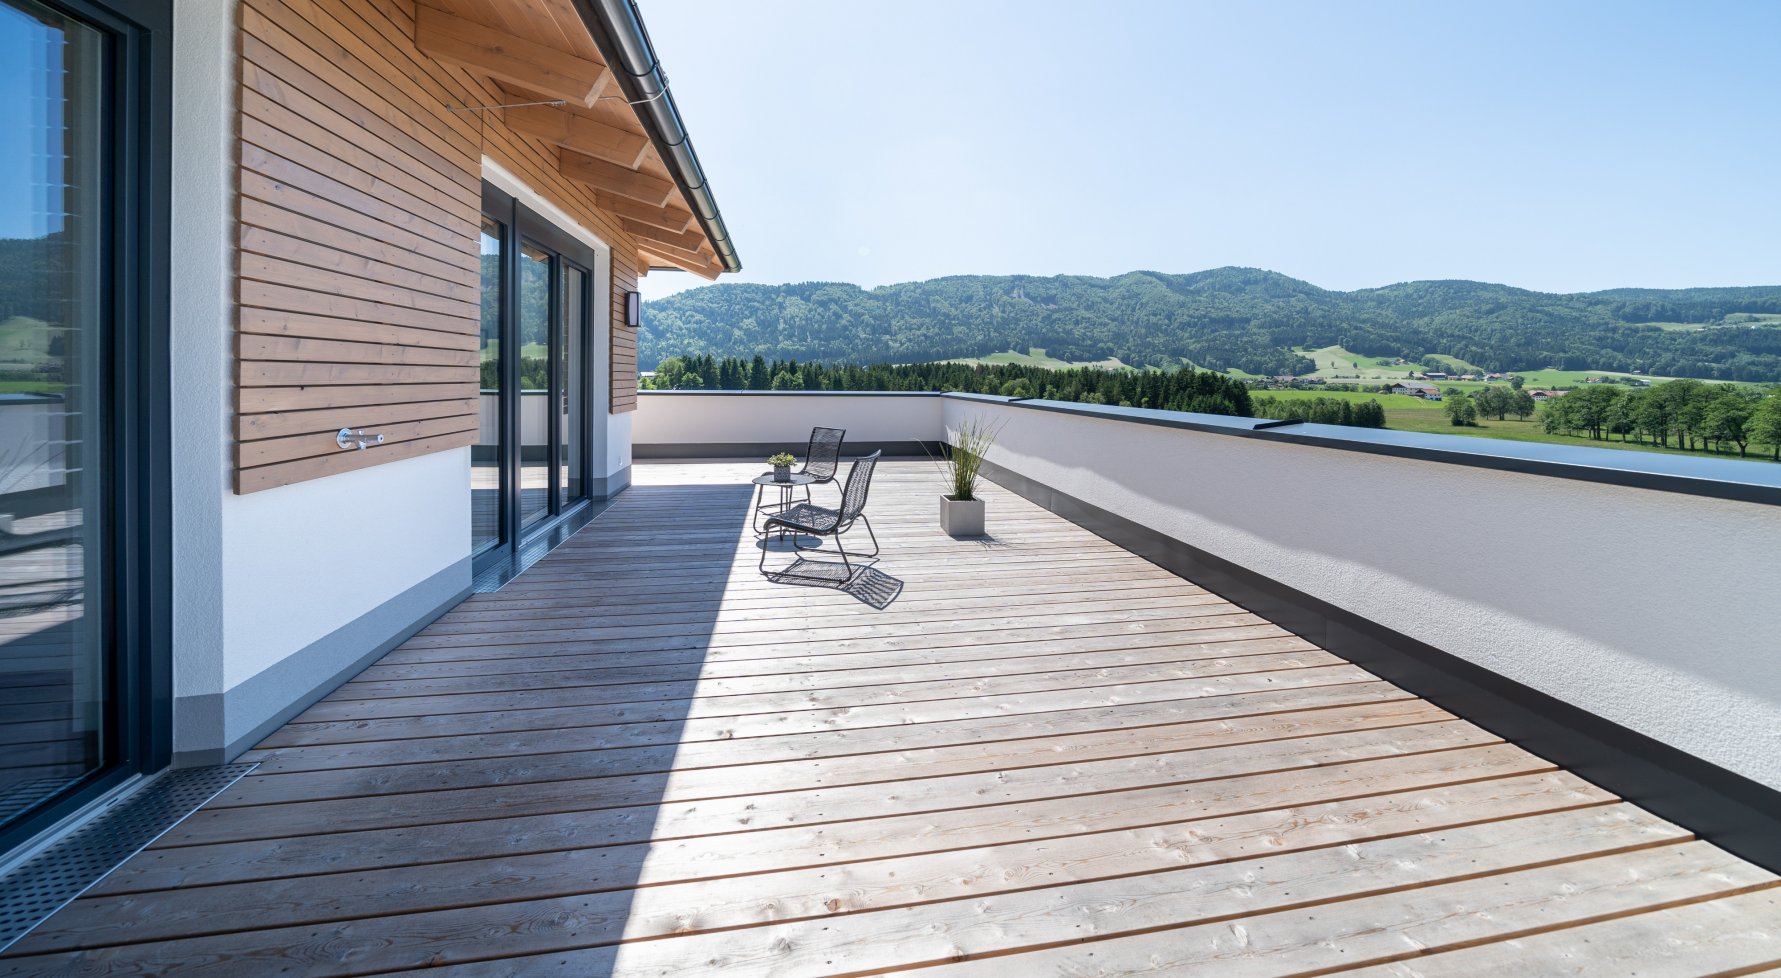 Property in 5310 Mondsee / Salzkammergut: MONDSEE Fantastic penthouse with approx. 143 m² roof terrace! - picture 1